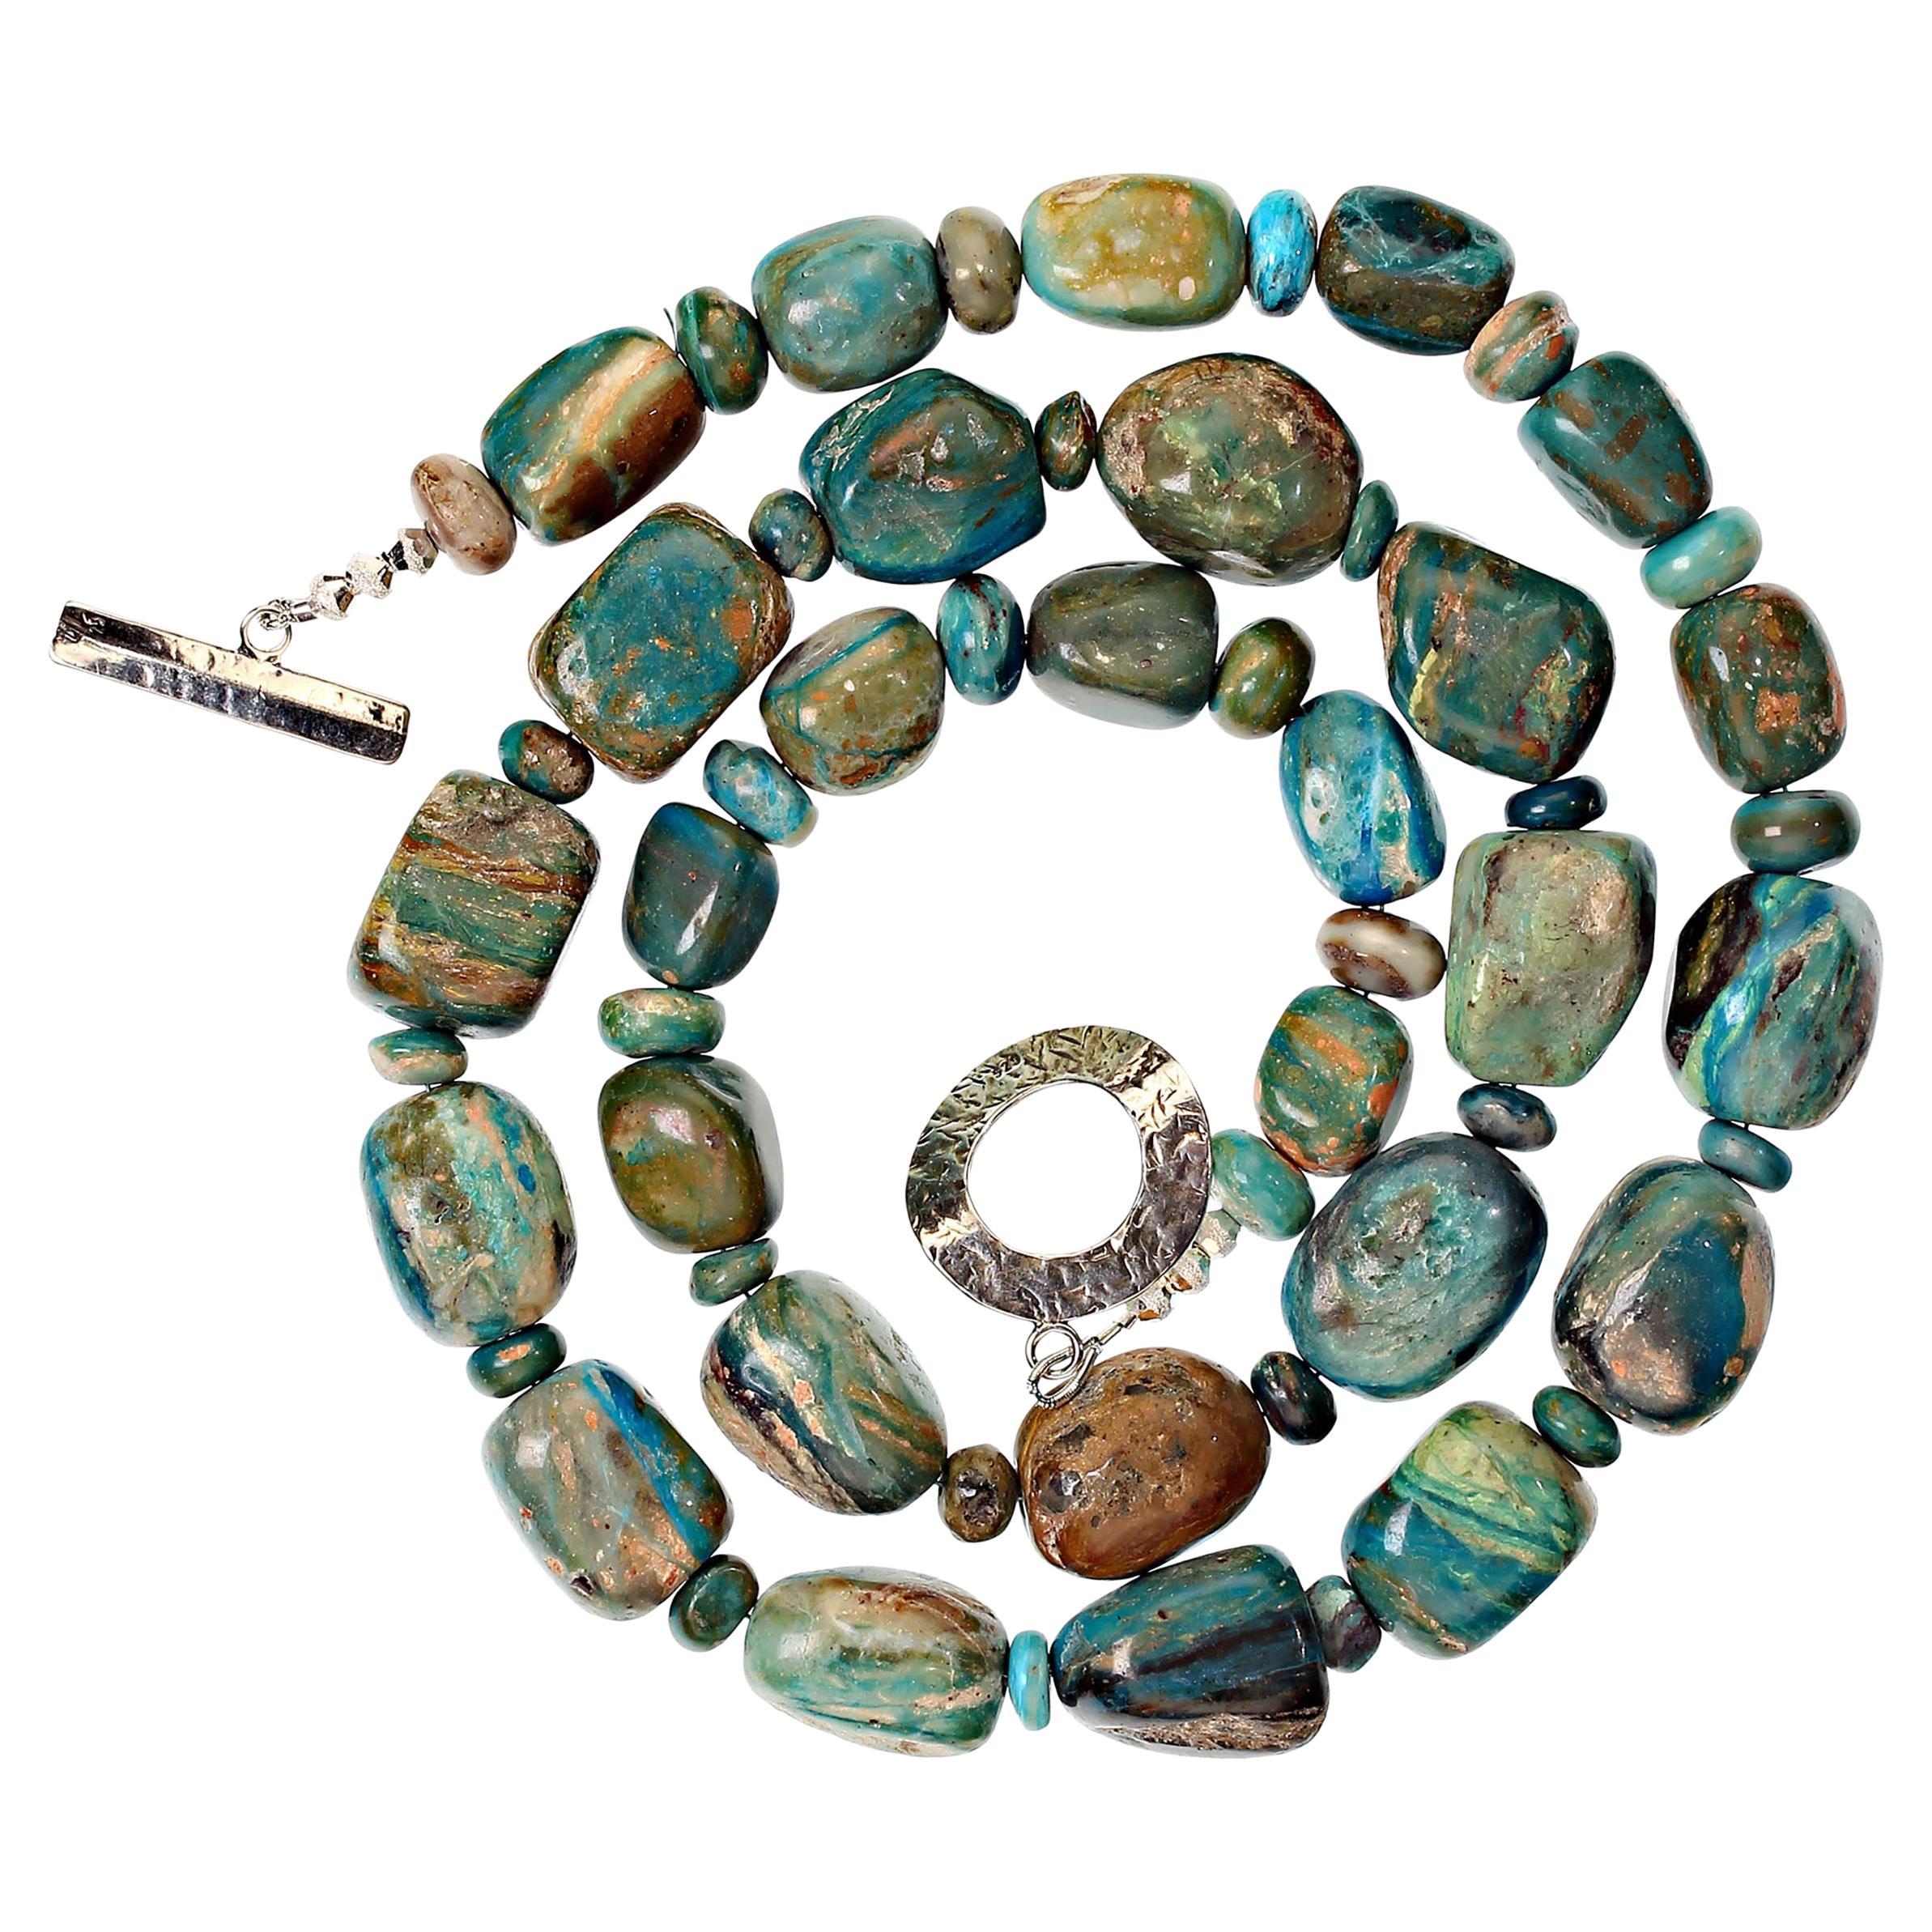 Unique blue Peruvian opal nugget necklace with hammered Sterling Silver toggle clasp. Each nugget is unique and colorful exhibiting blue, tan, gray, brown, and green, all in various shades.  The nuggets are gently graduated and spaced with rounded